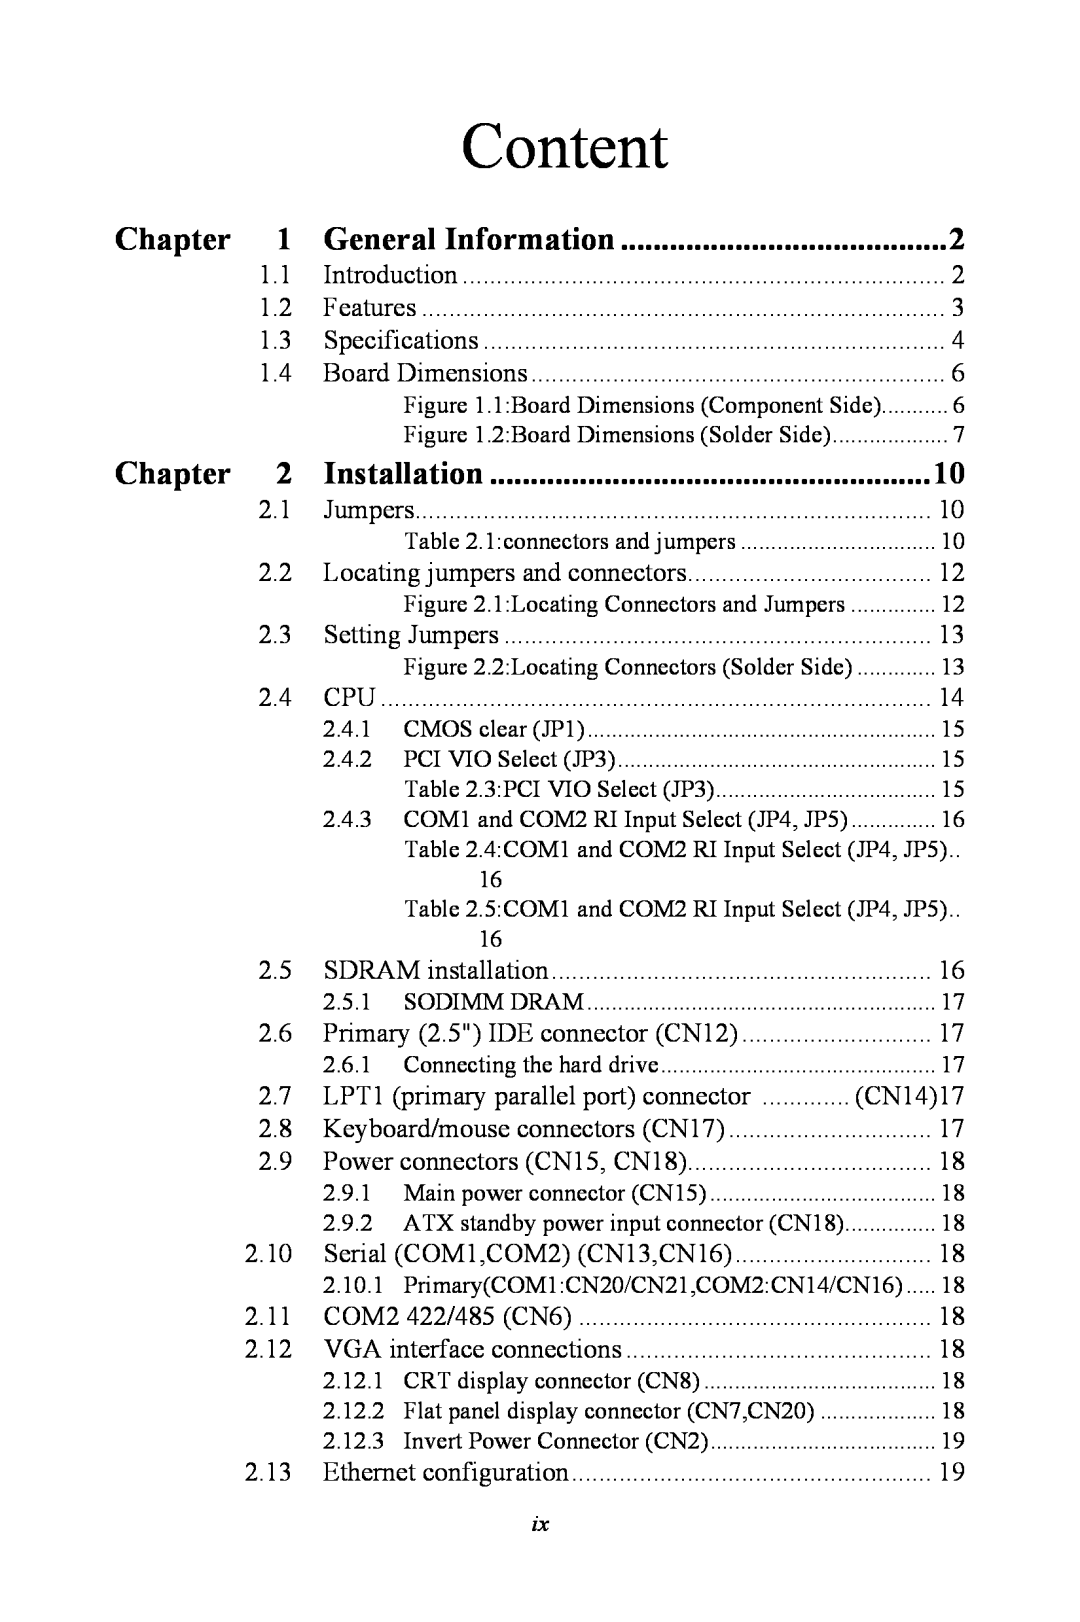 Intel PCM-3370 user manual Chapter, General Information, Installation, Content 